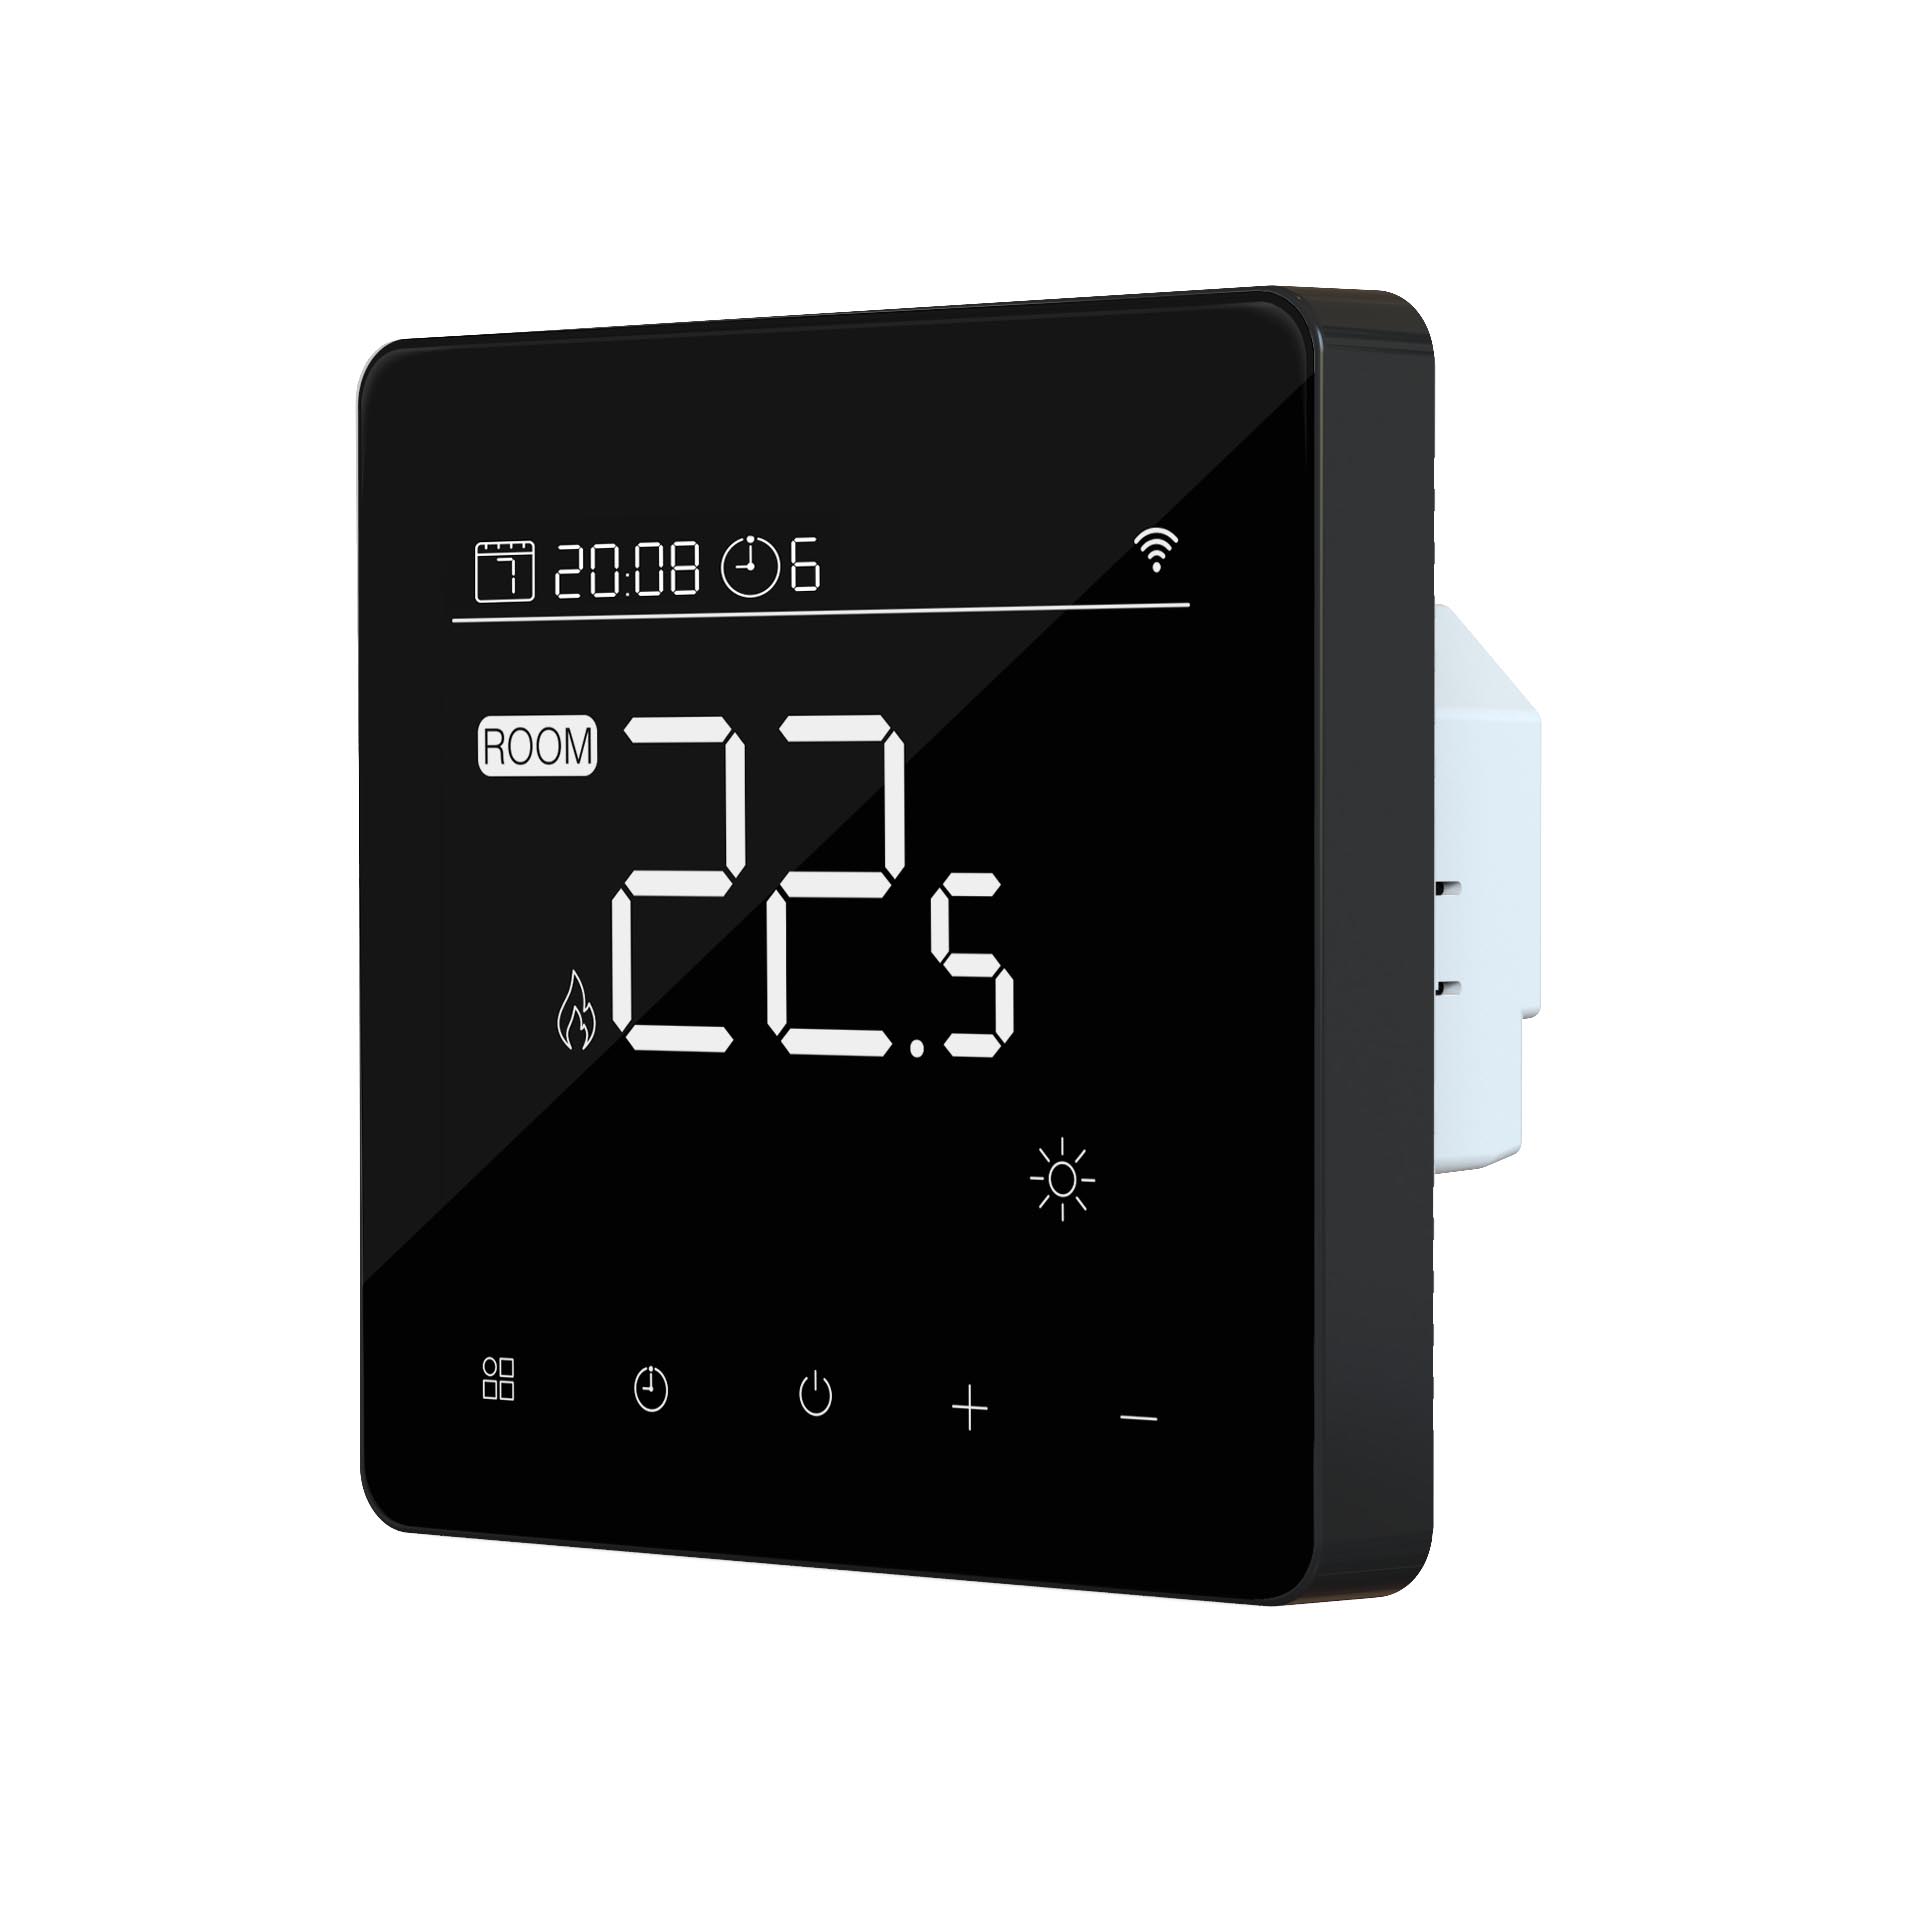 Smart WIFI Thermostat for Underfloor Heating and Fan Coil Units